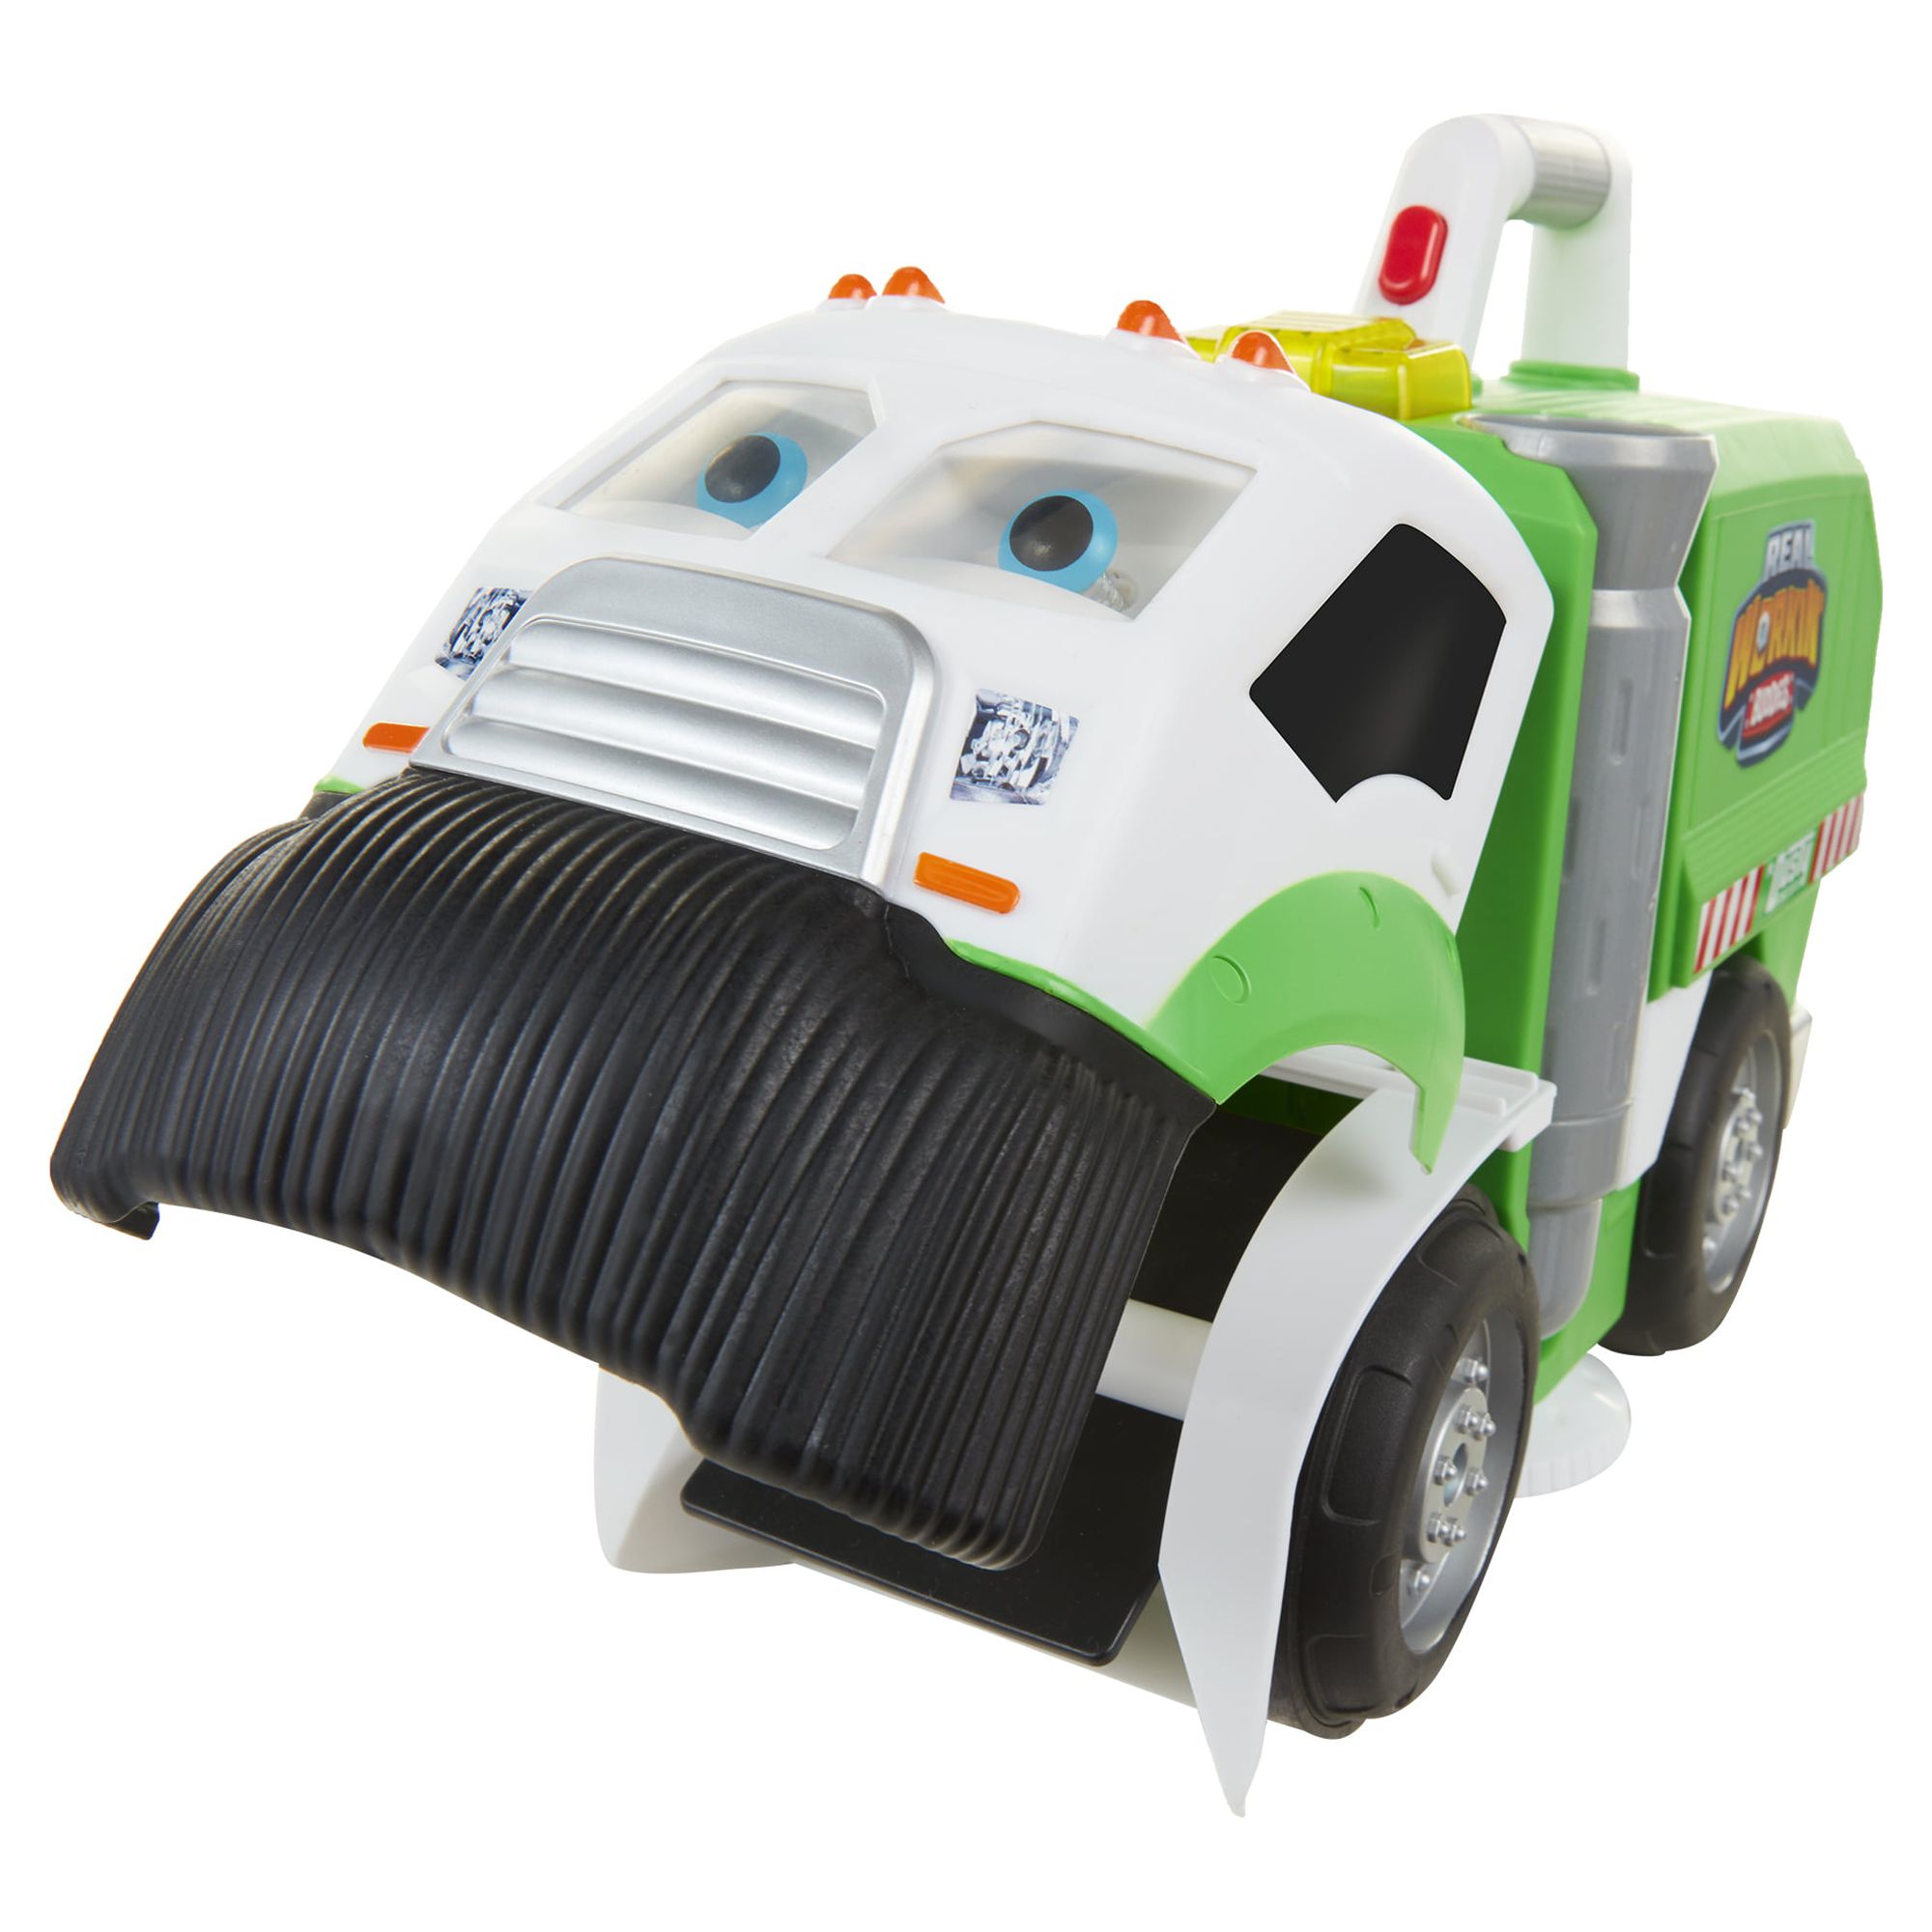 Mr. Dusty The Super Duper Toy Eating Garbage Truck, Picks up small toys (Building Blocks, toy cars, etc.) - image 5 of 5